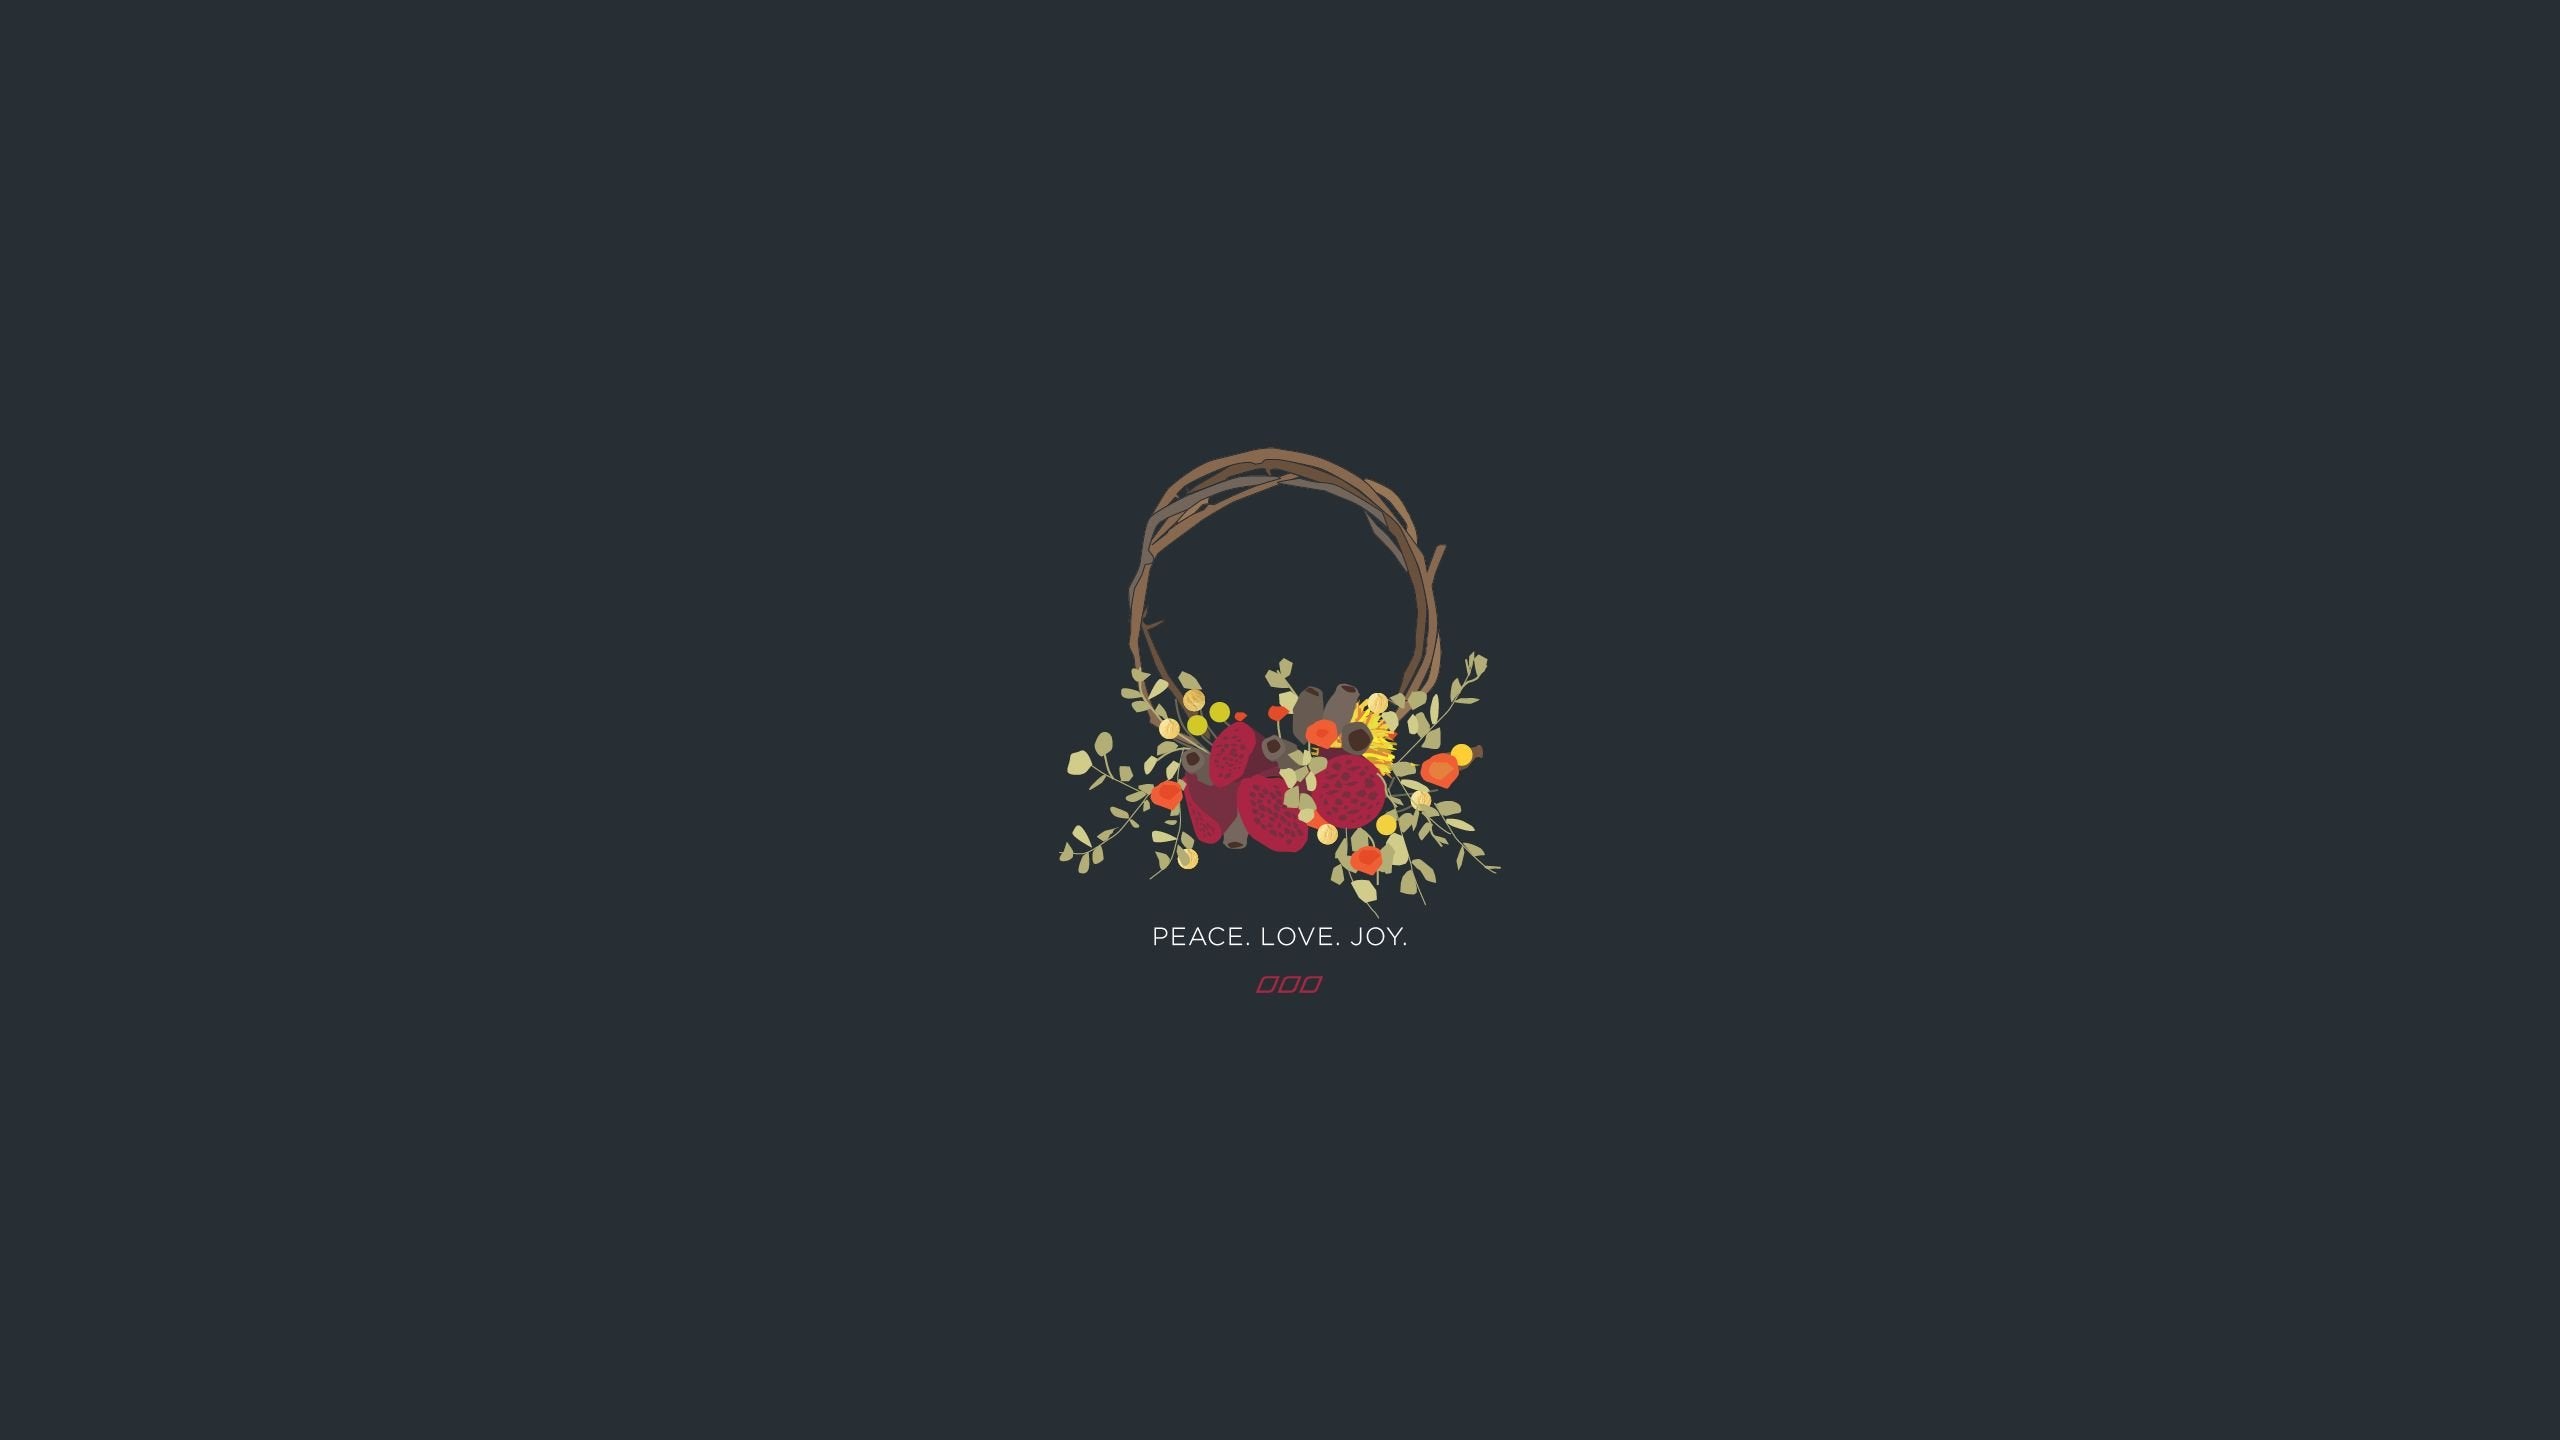 A wallpaper of the headphones with flowers - Peace, 2560x1440